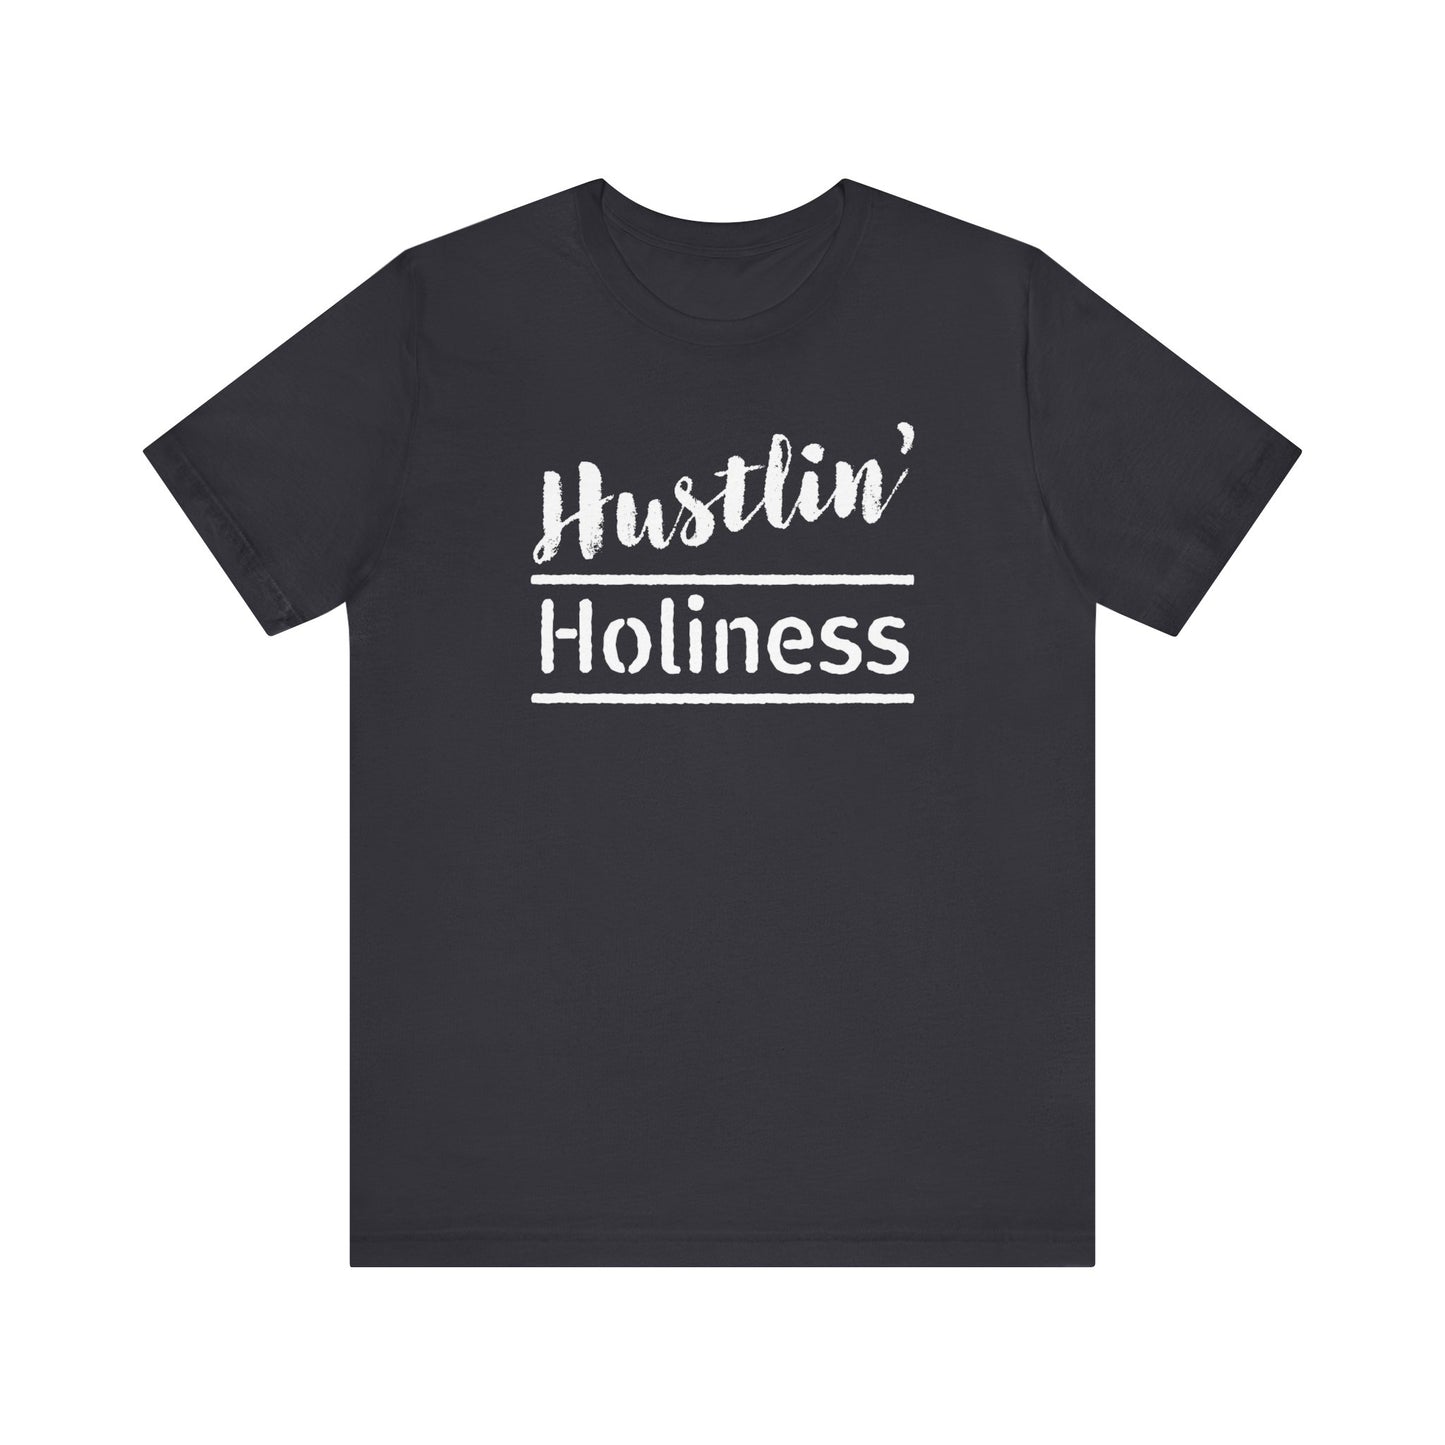 HUSTLING HOLINESS. Wearing & Sharing The Word. Live JESUS out loud. Tshirts. Christian. Jesus. Faith. Gifts. Church. Recovery. Addiction.